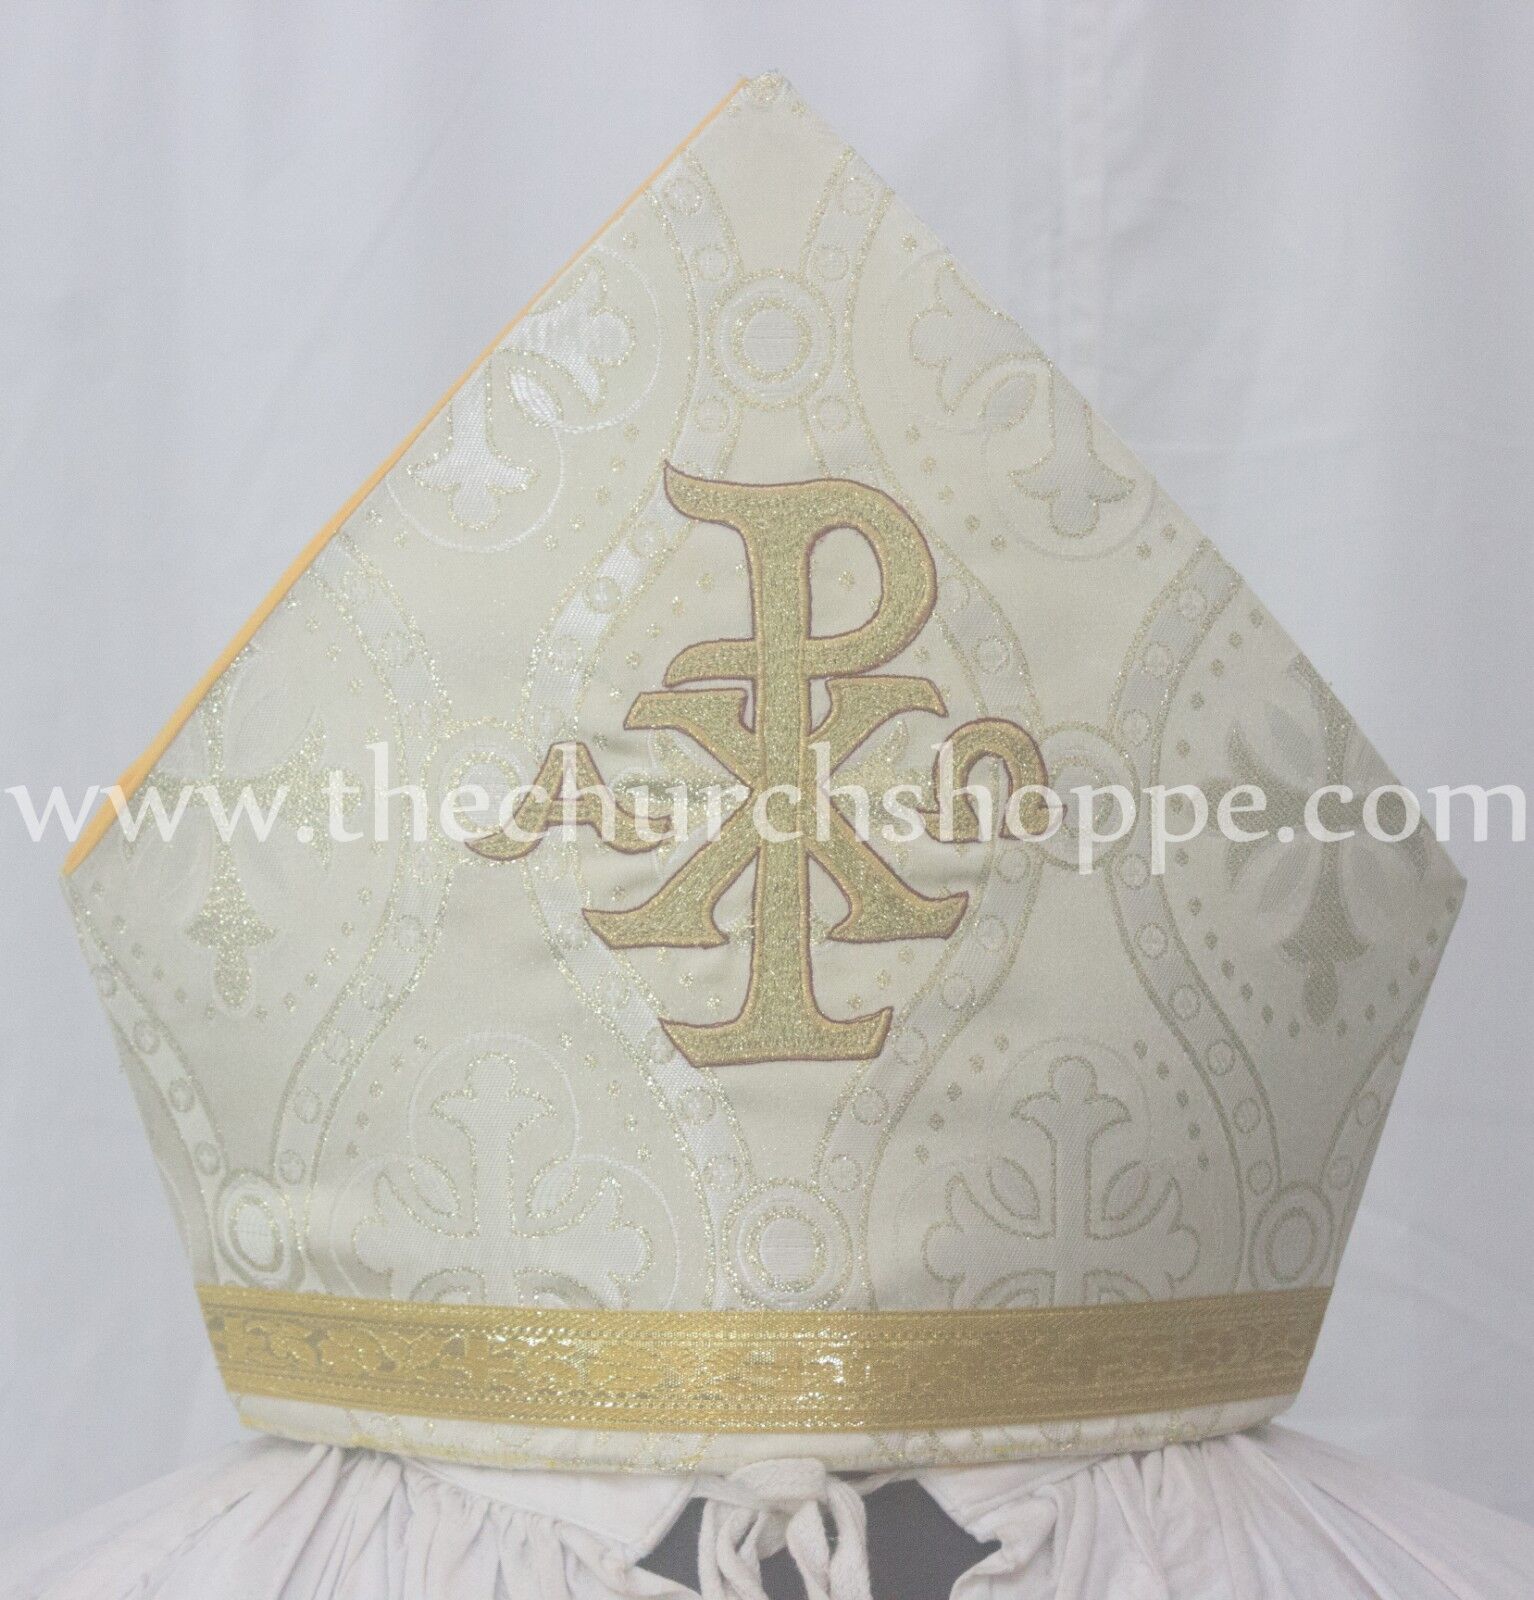 New Metallic Gold Mitre with CHI RHO embroidery,mitra,Bishop's Mitre, New